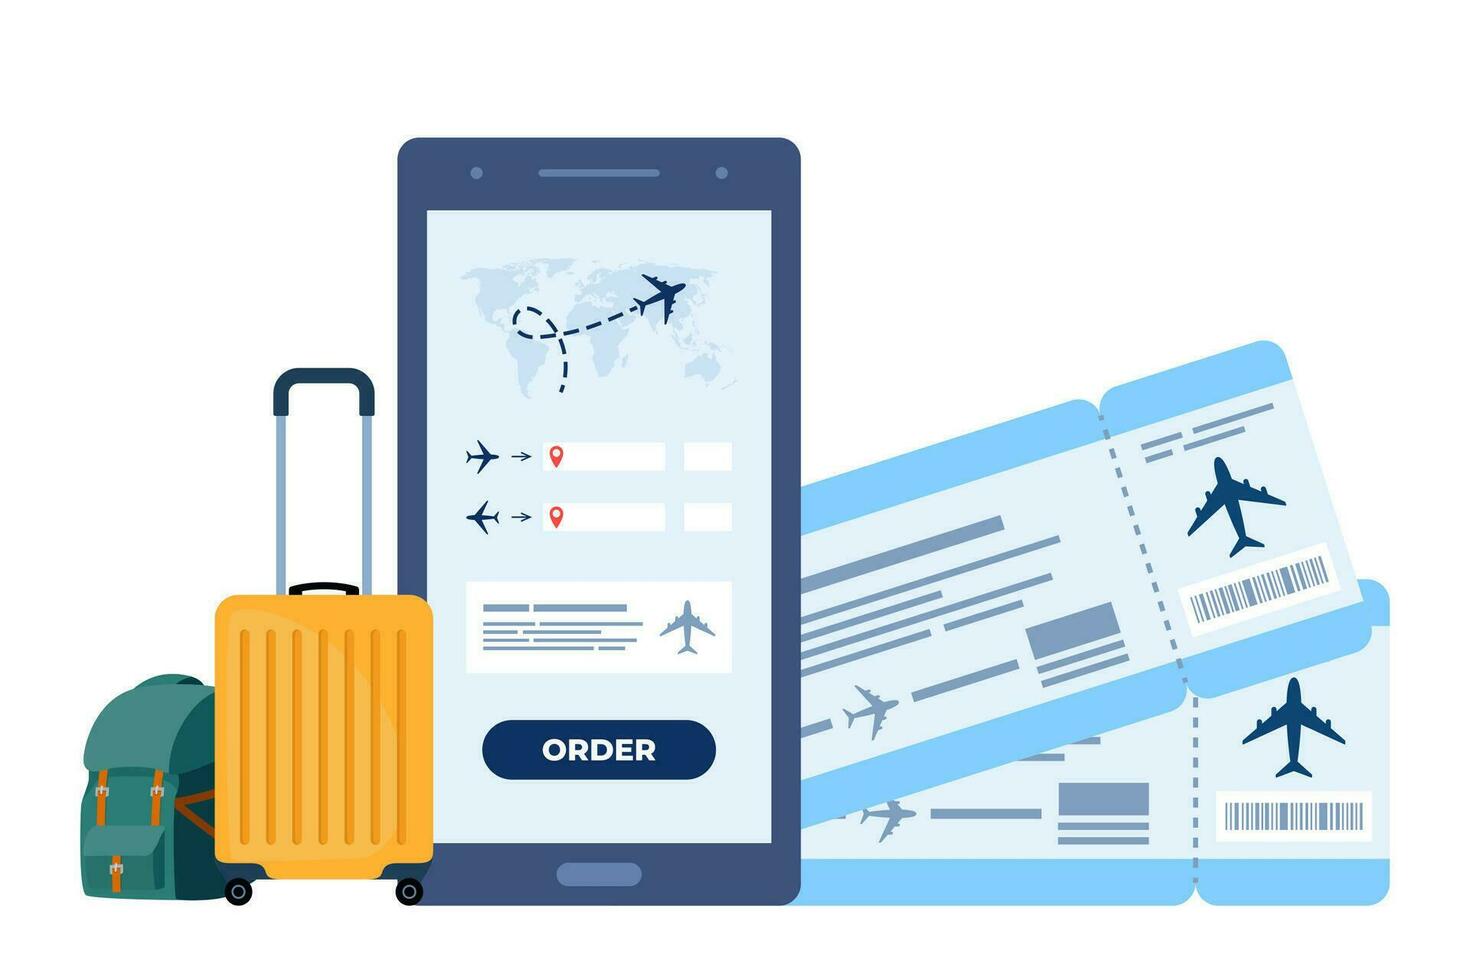 Mobile app for buying ticket with smartphone. Booking flights travel. Air tickets and baggage. Travel, journey, business trip. Vector illustration.